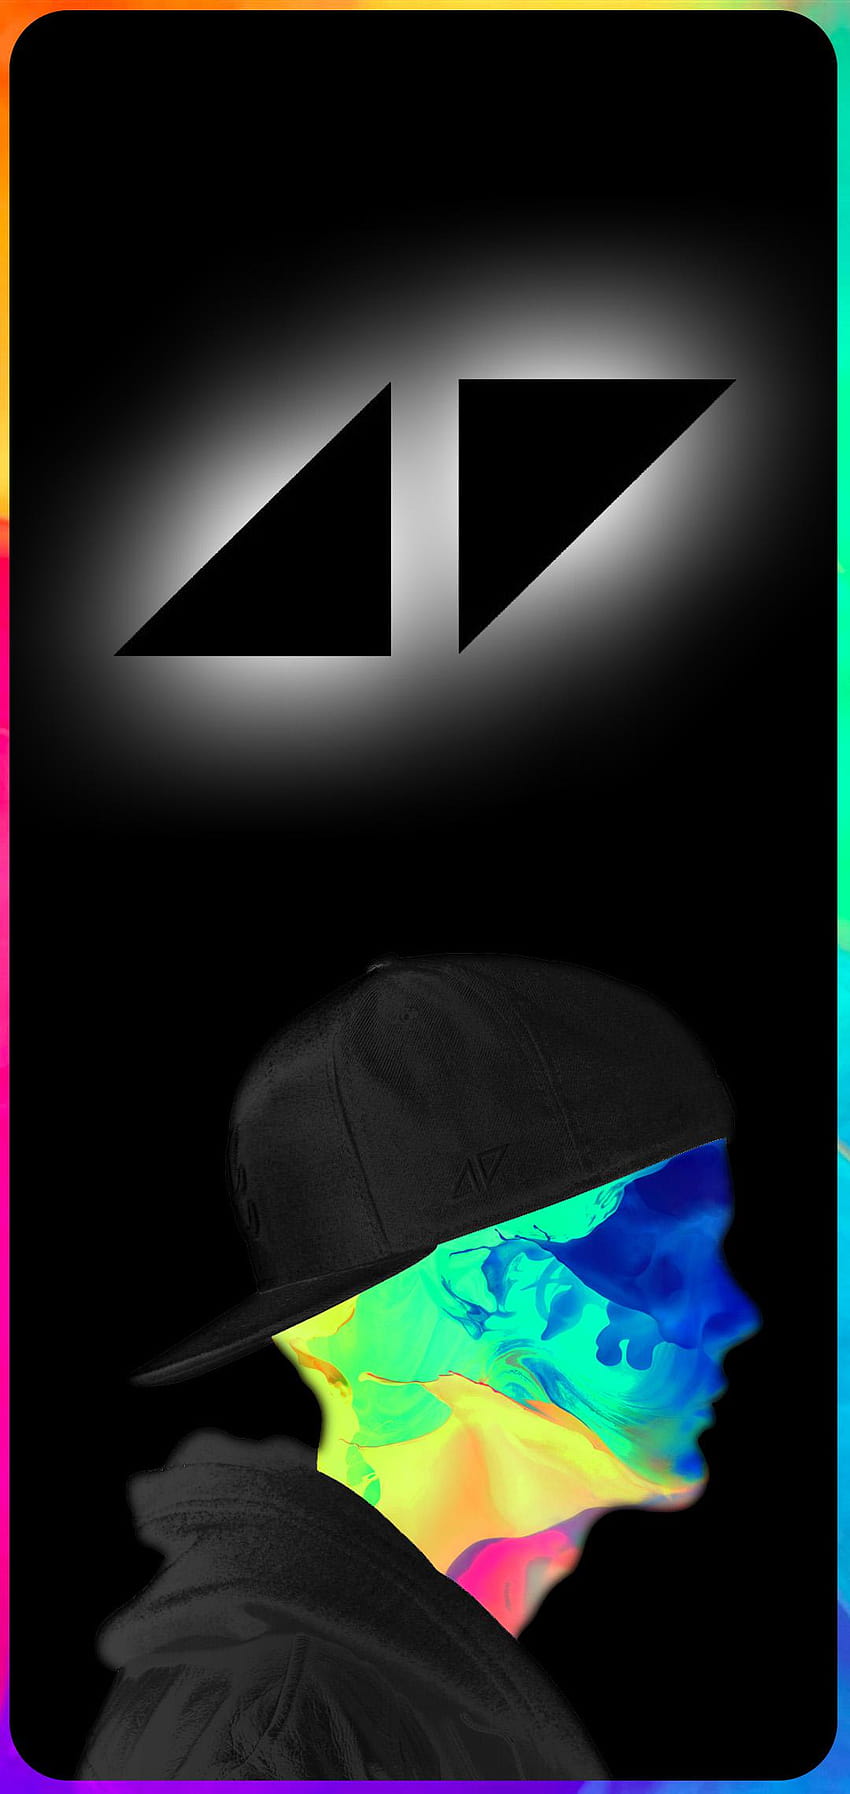 Made an Avicii wallpaper for pc 1080p Link in comments  ravicii